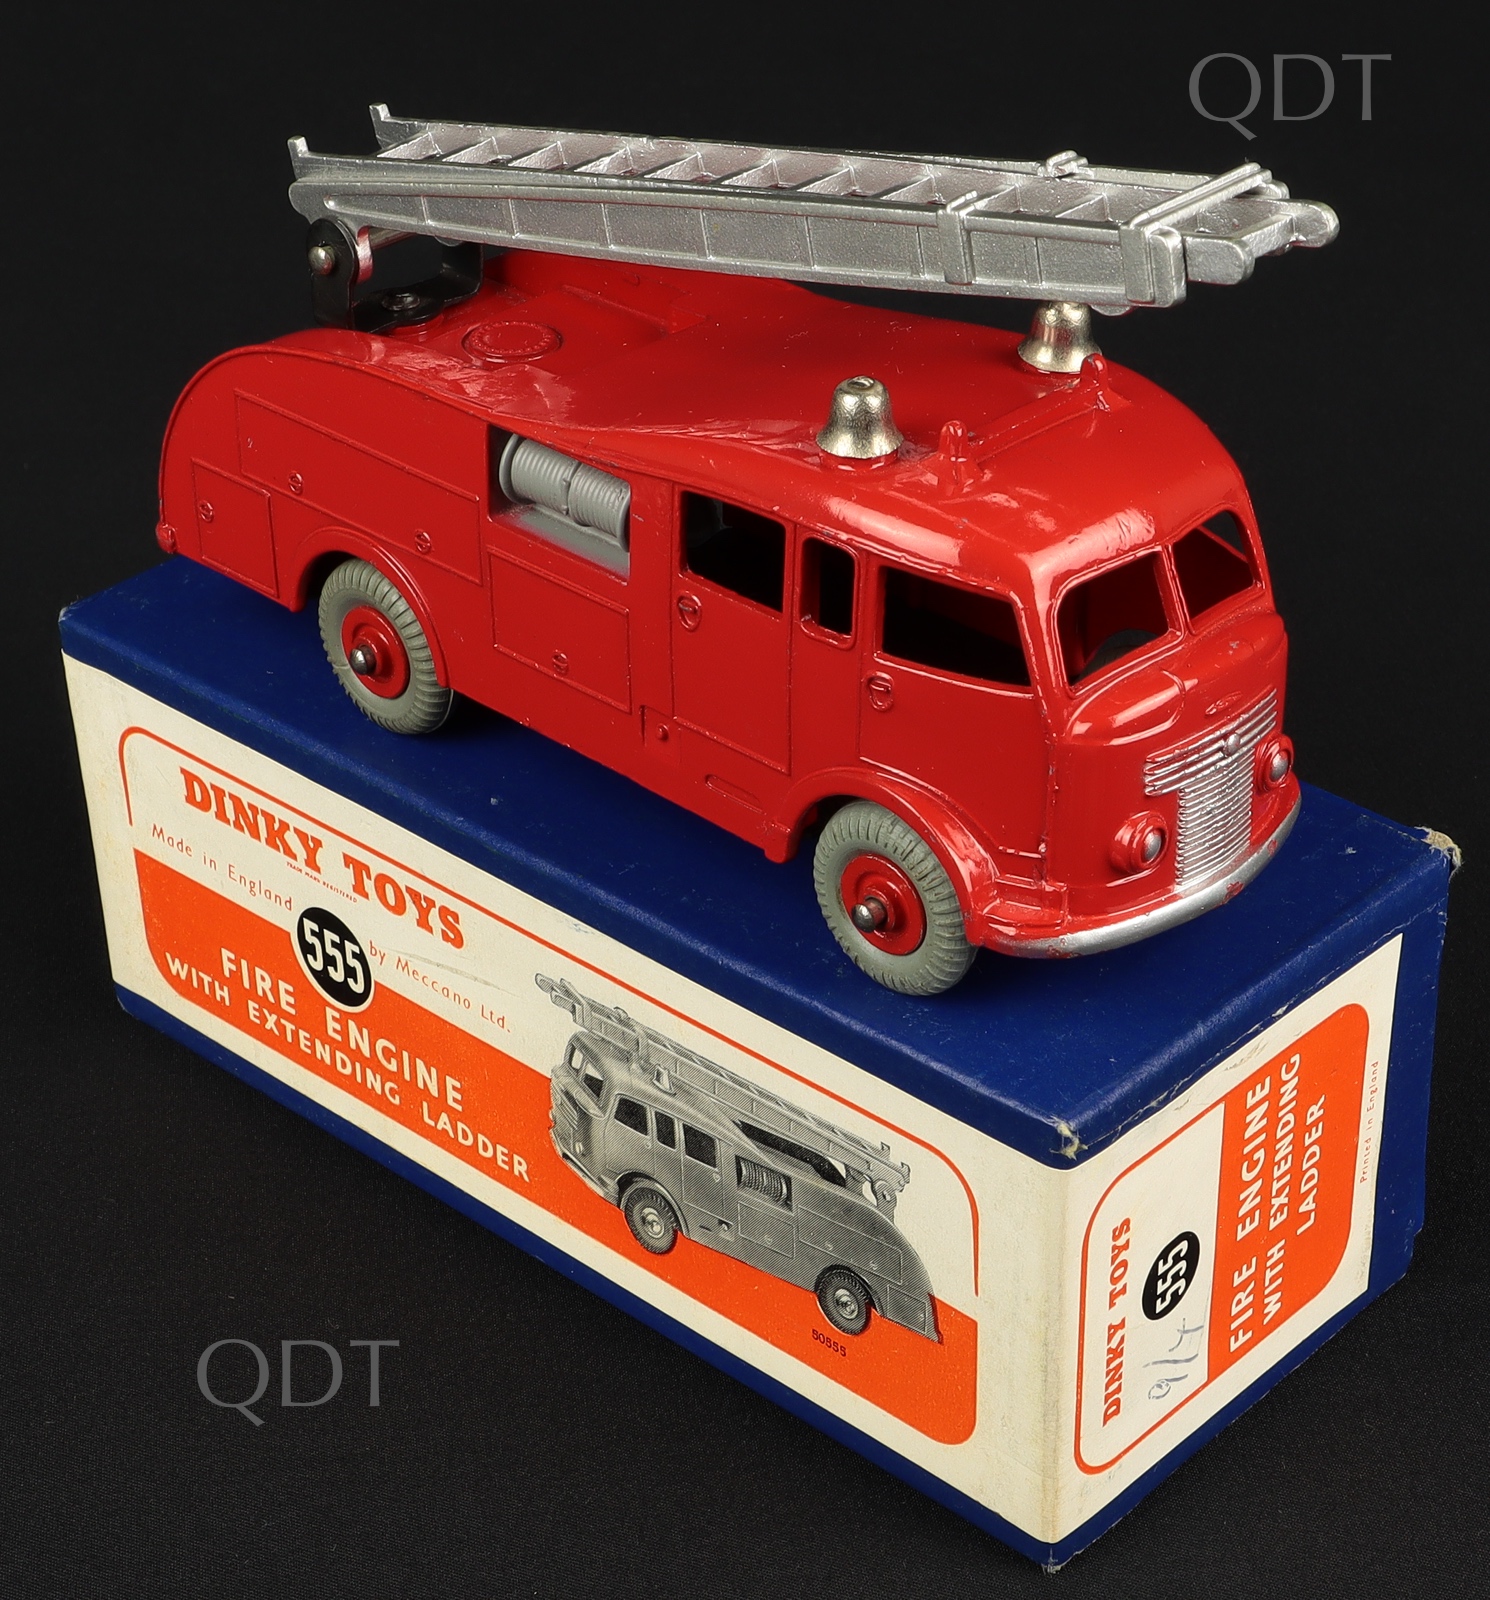 Dinky Toys 555 Fire Engine - QDT